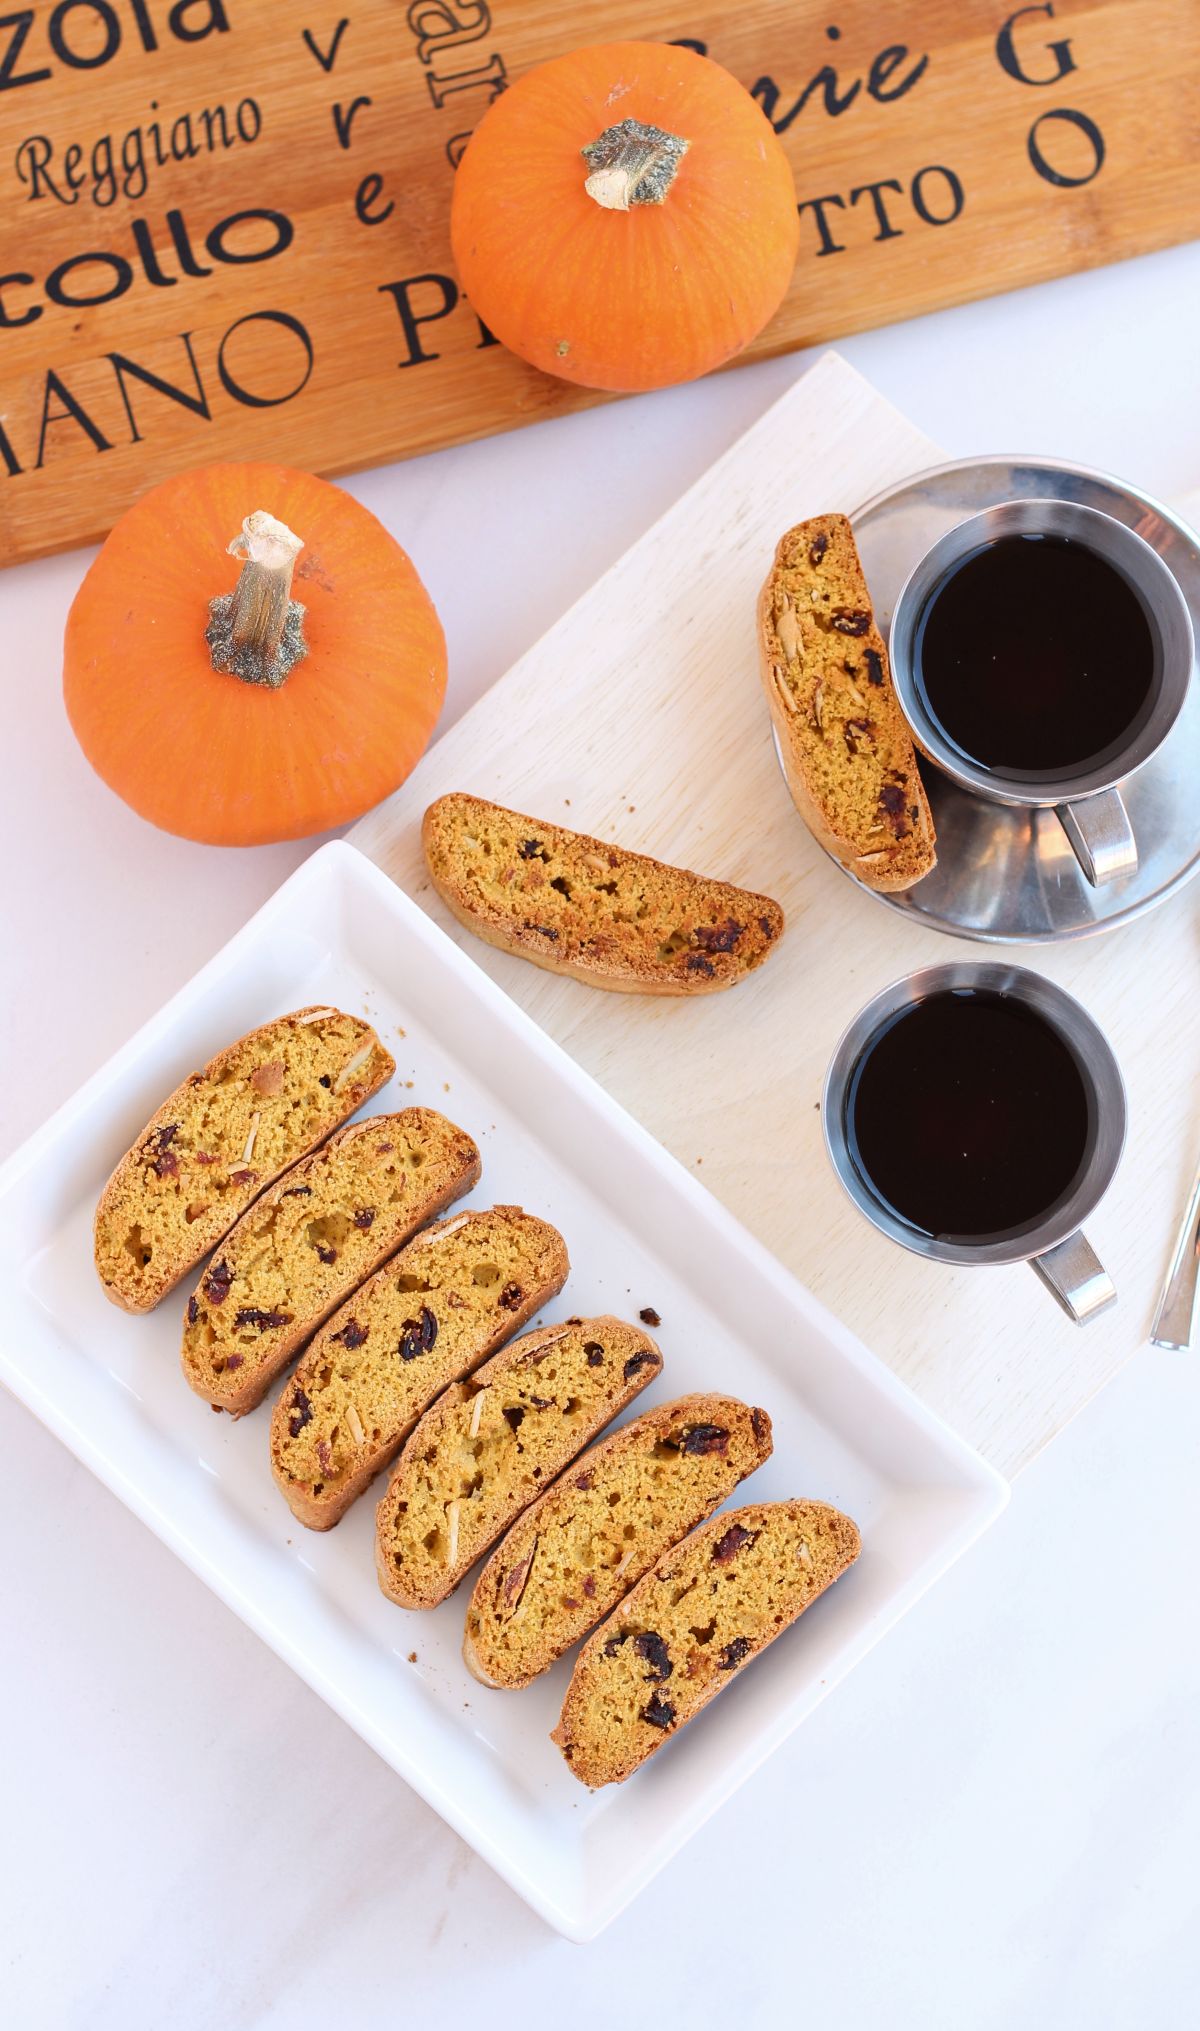 biscotti with almonds and cranberries